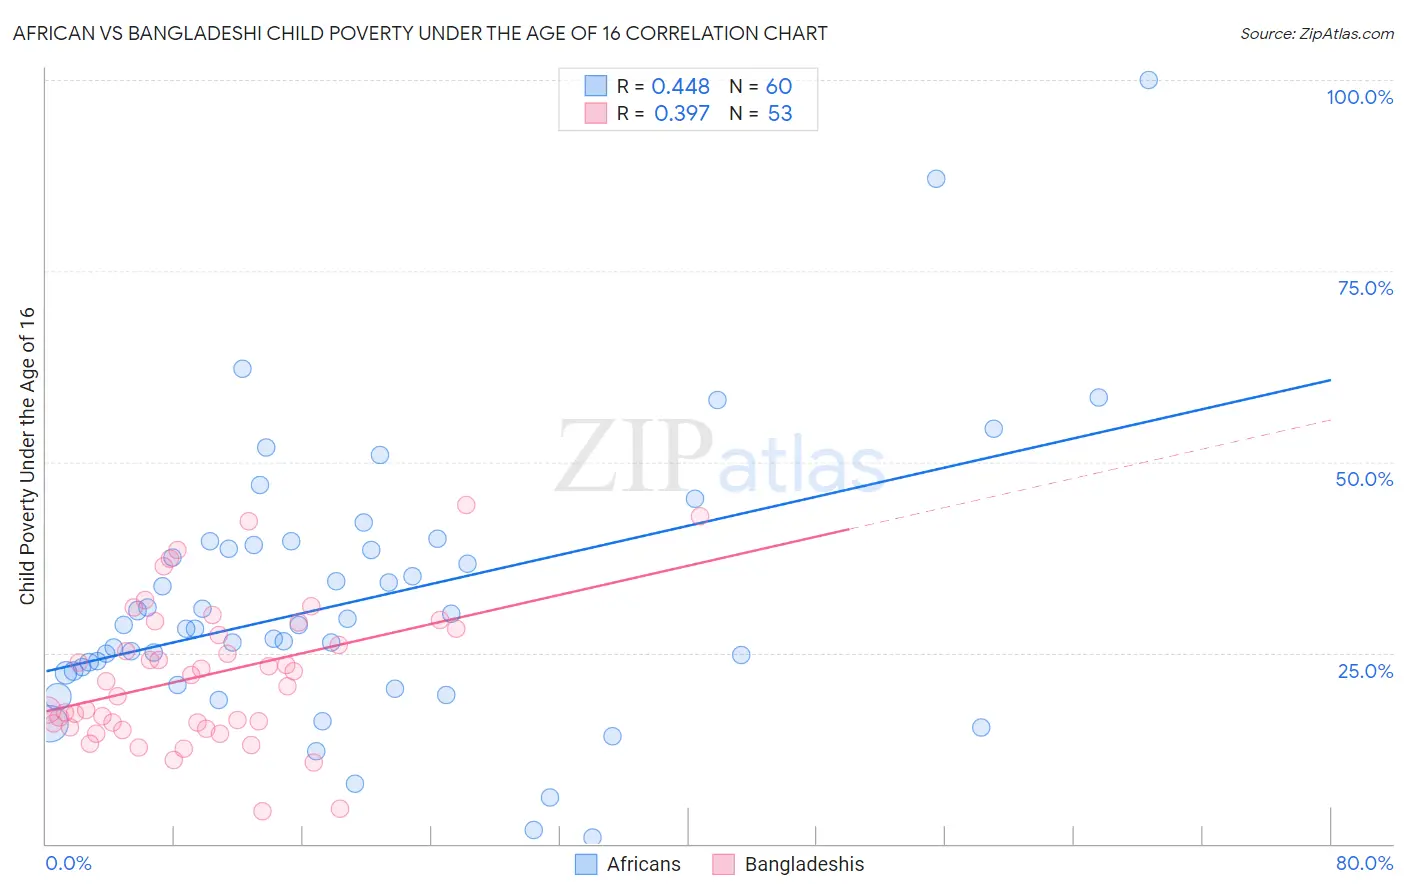 African vs Bangladeshi Child Poverty Under the Age of 16